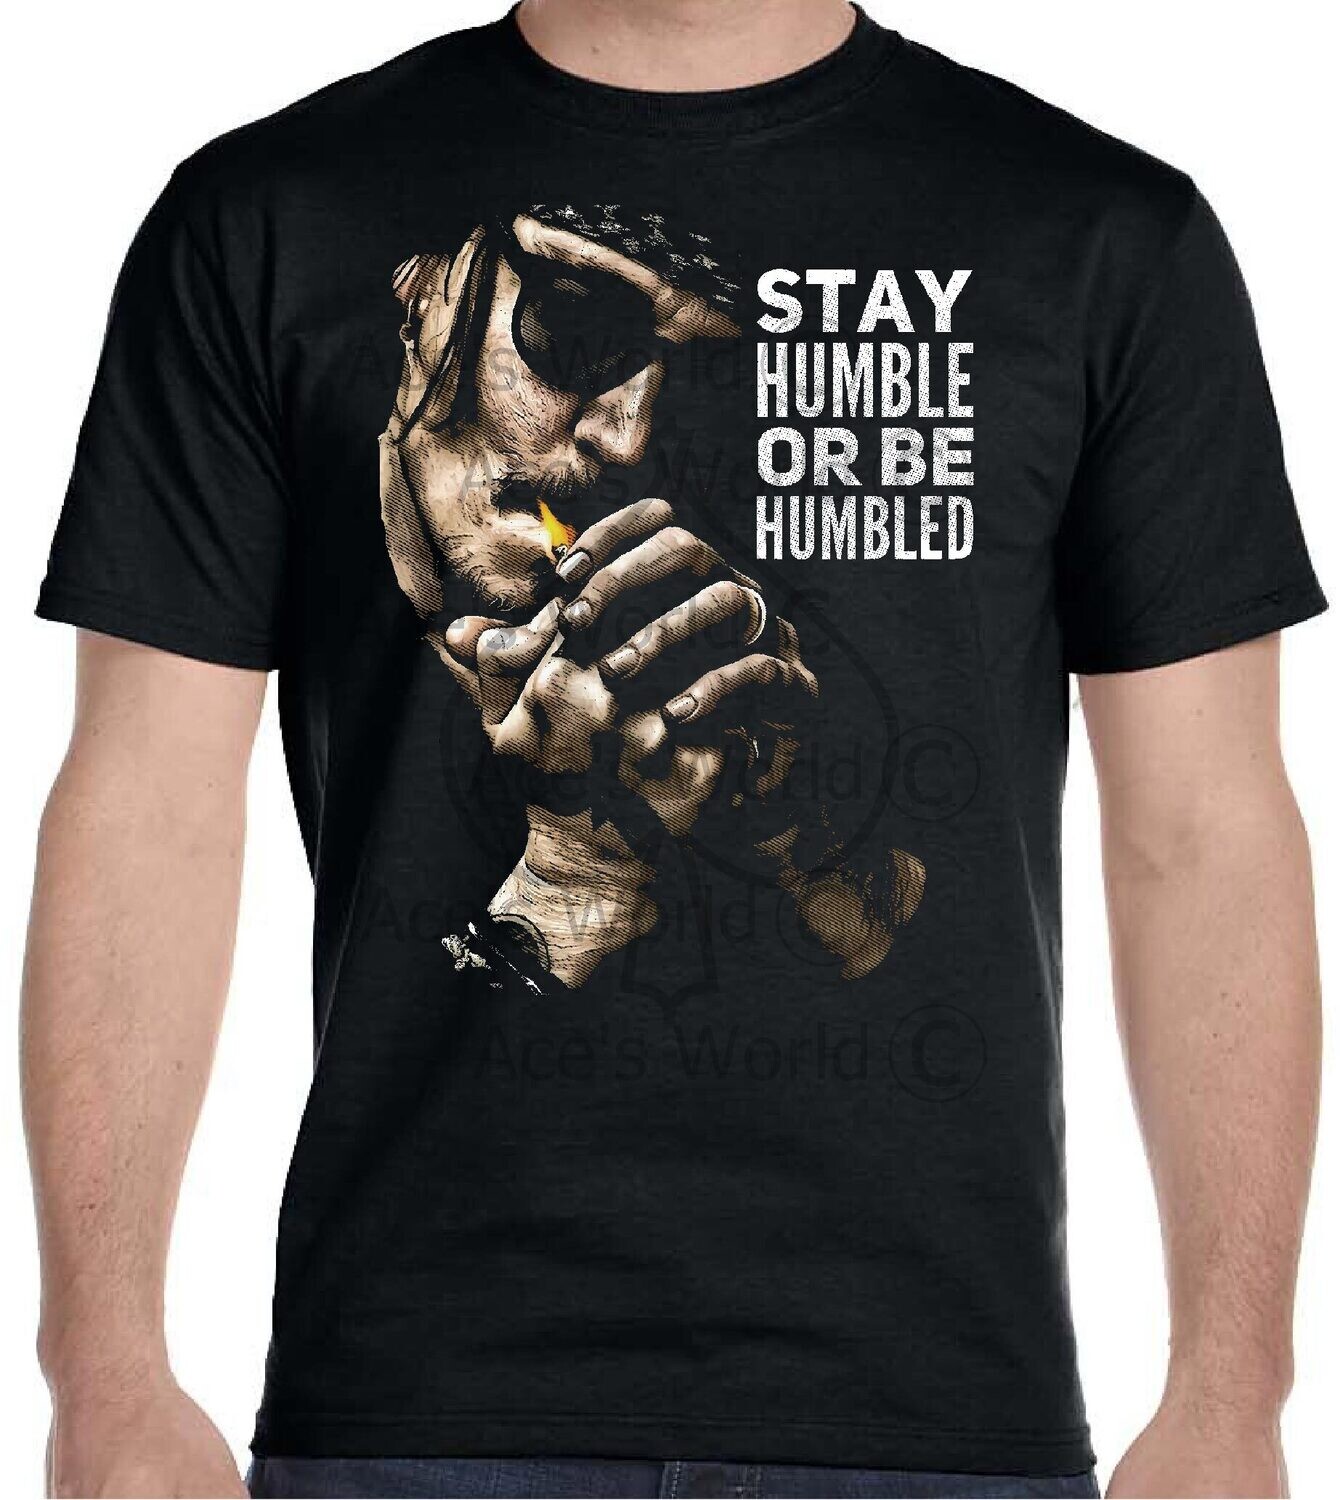 STAY HUMBLE OR BE HUMBLED BLACK T-SHIRT